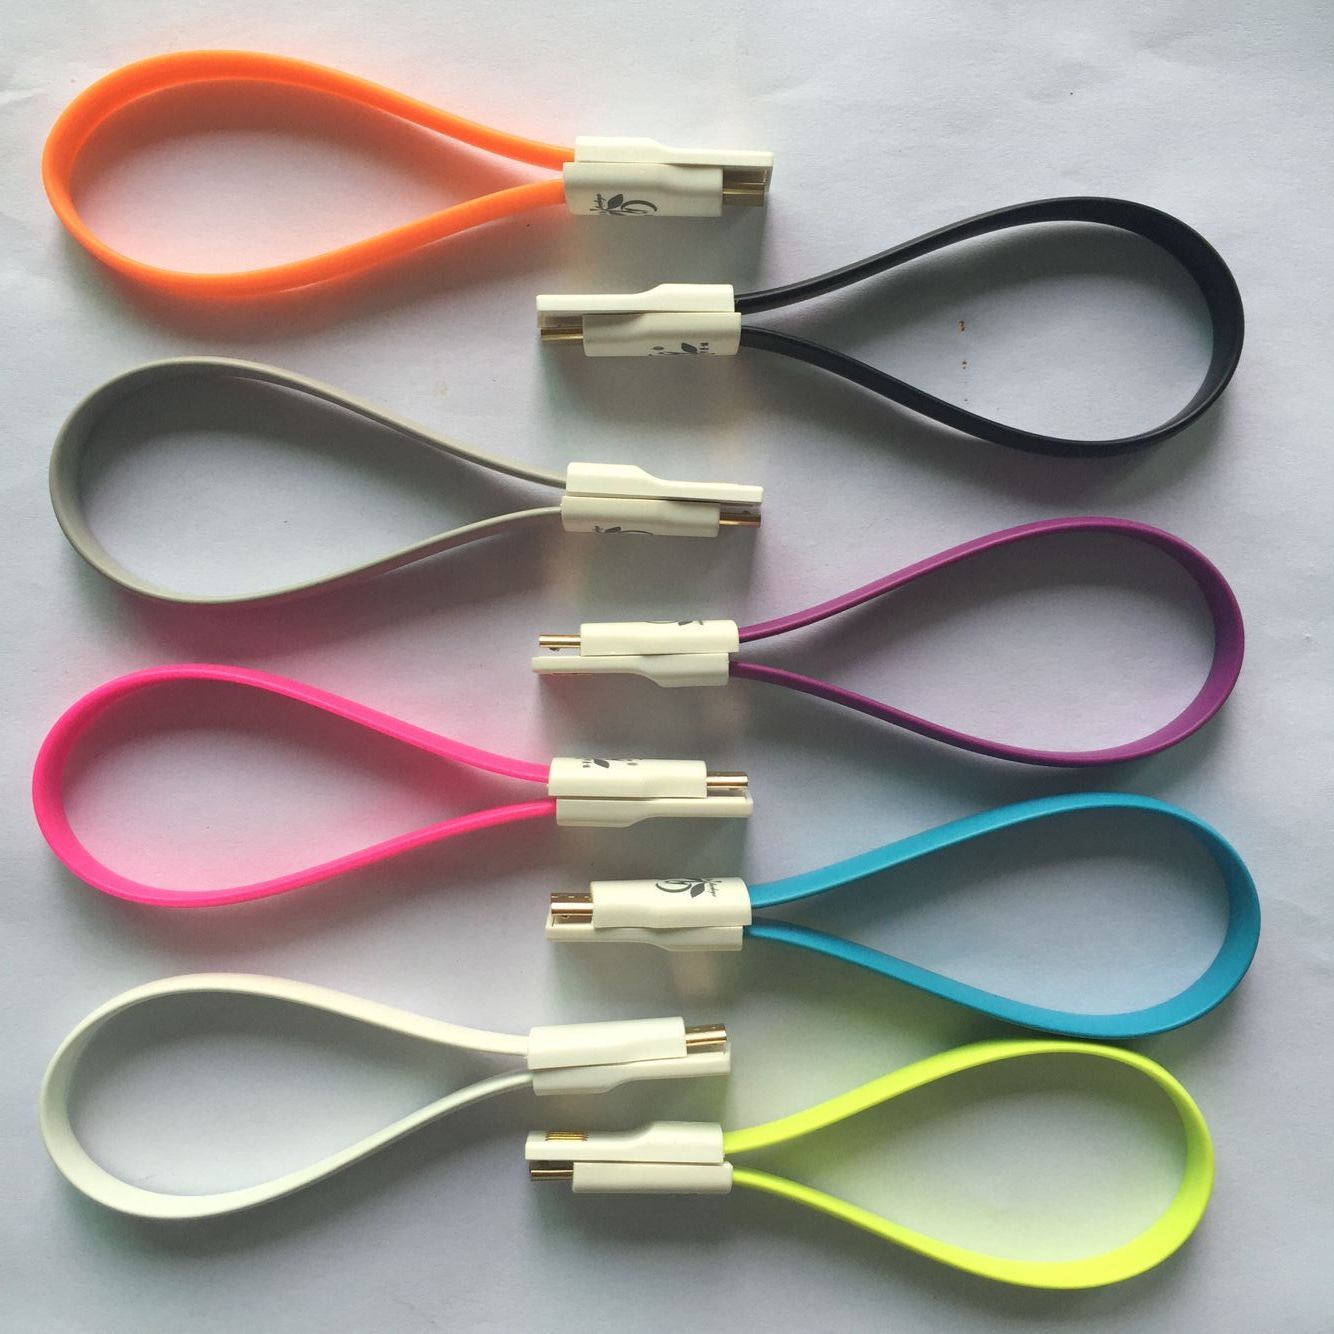 V8 mage data cable(9)1